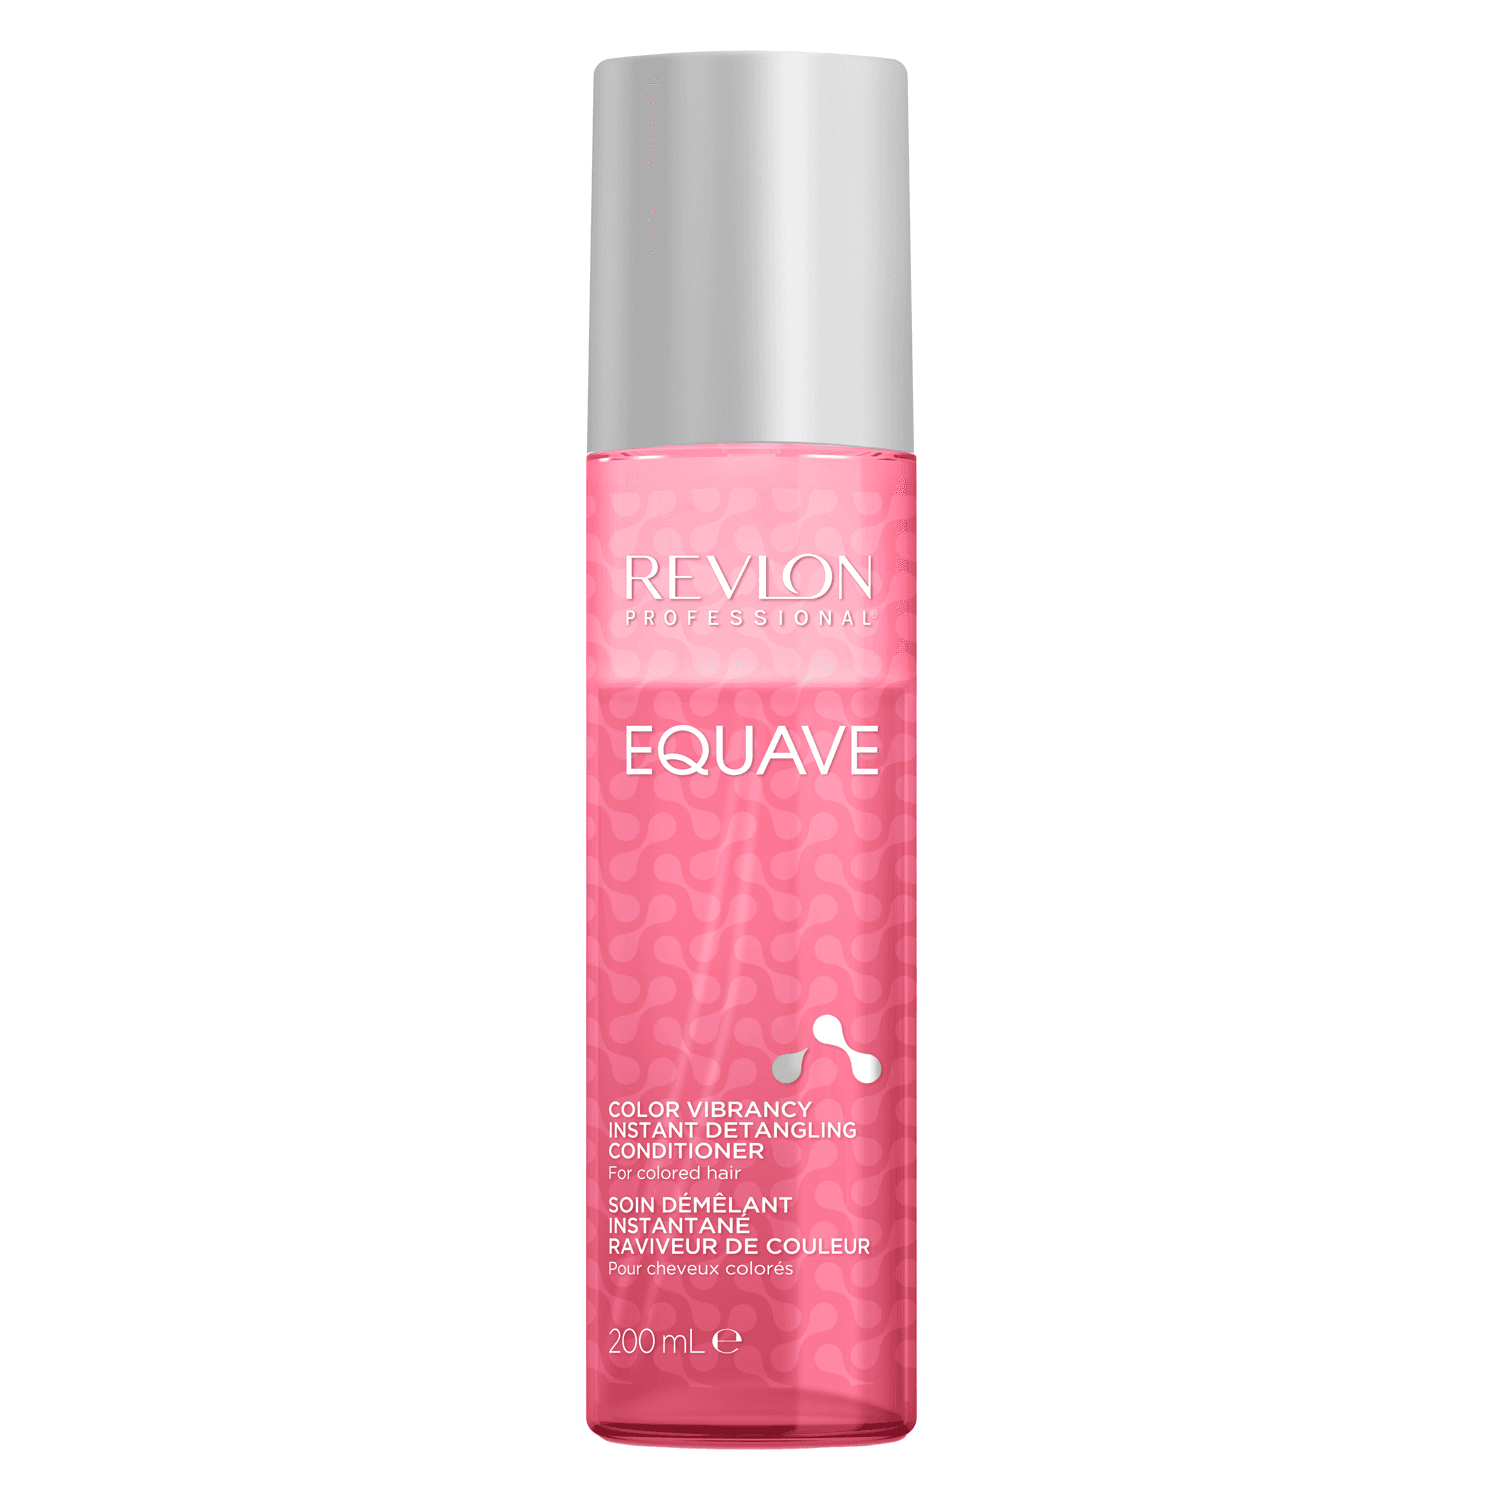 Equave - Color Vibrancy Leave-In Conditioner